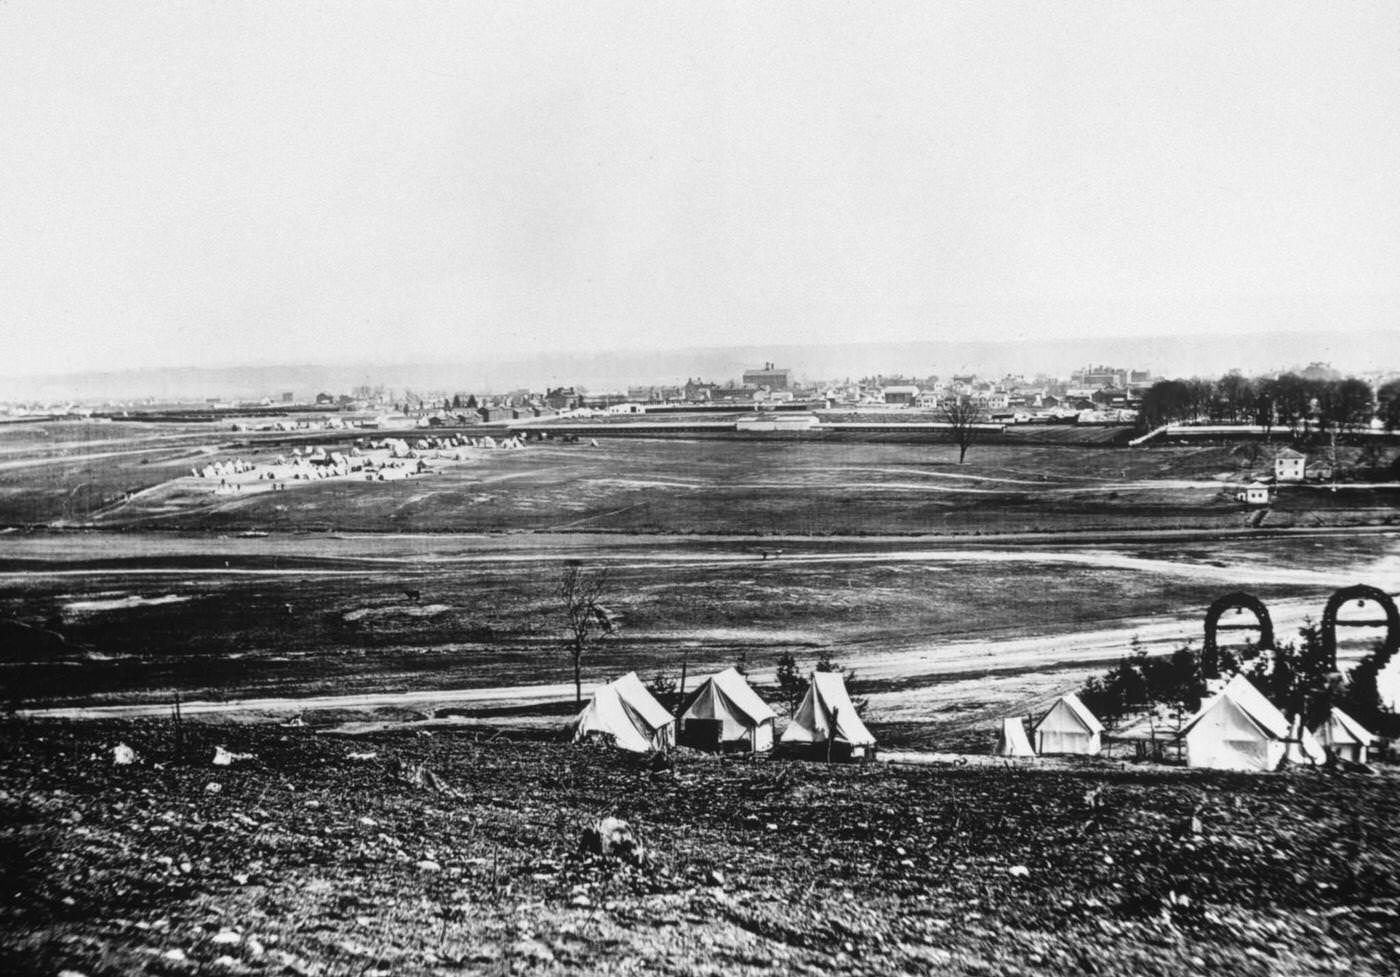 View of Alexandria, Virginia, tents of the 44th New York Infantry in foreground during the US civil war. Alexandria was captured by the Union in 1861.